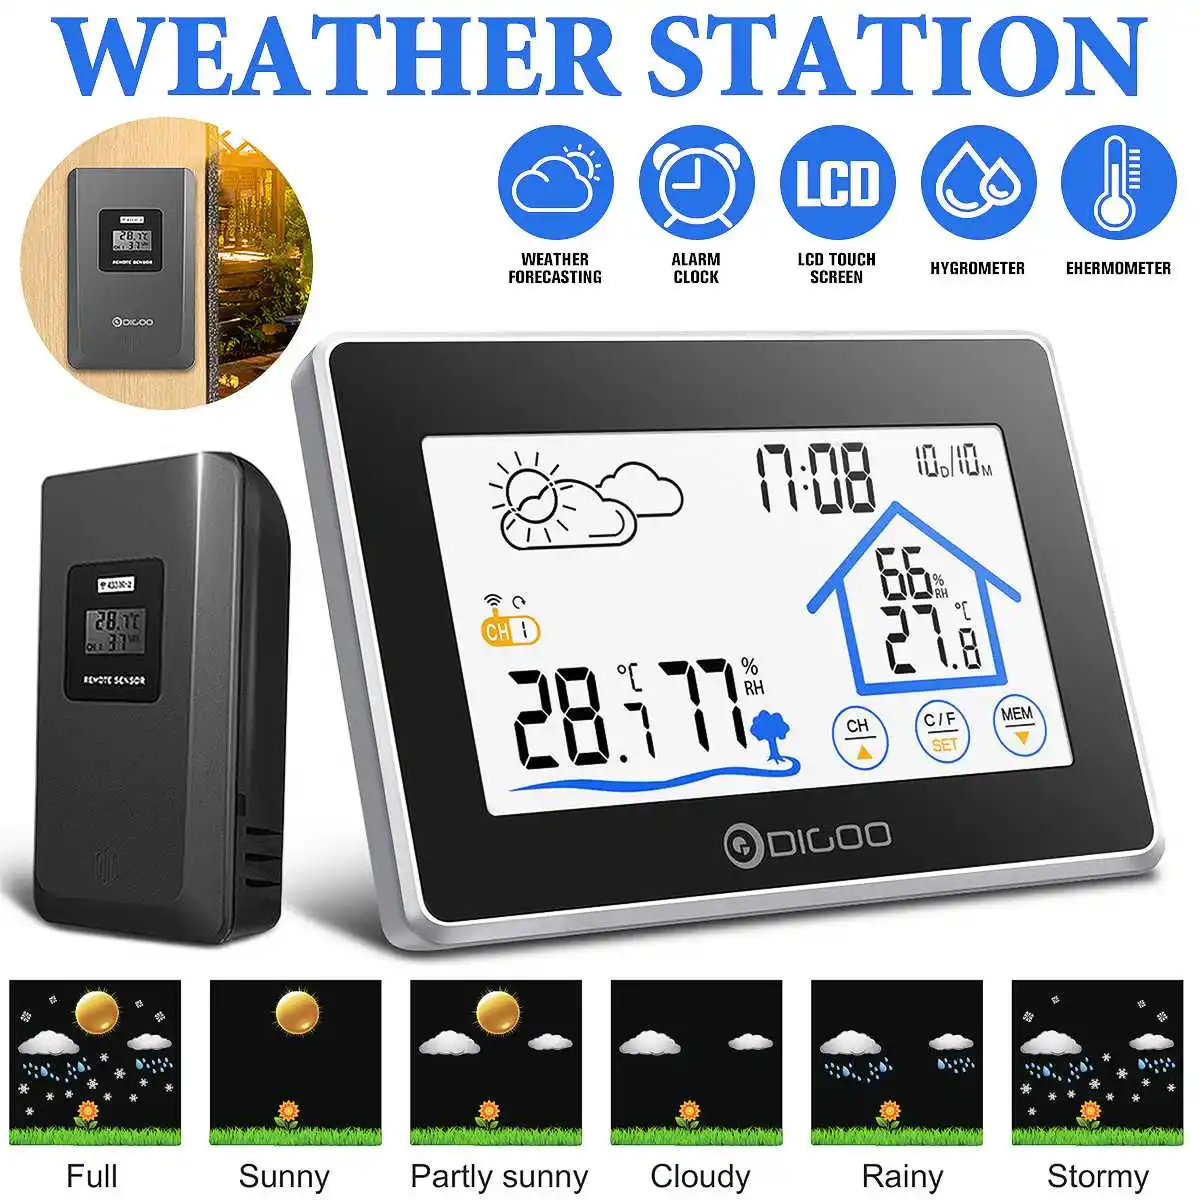 

Digoo DG-TH8380 Wireless Touch Weather Station Indoor Outdoor Forecast Sensor Thermometer Hygrometer Meter Calendar Backlight